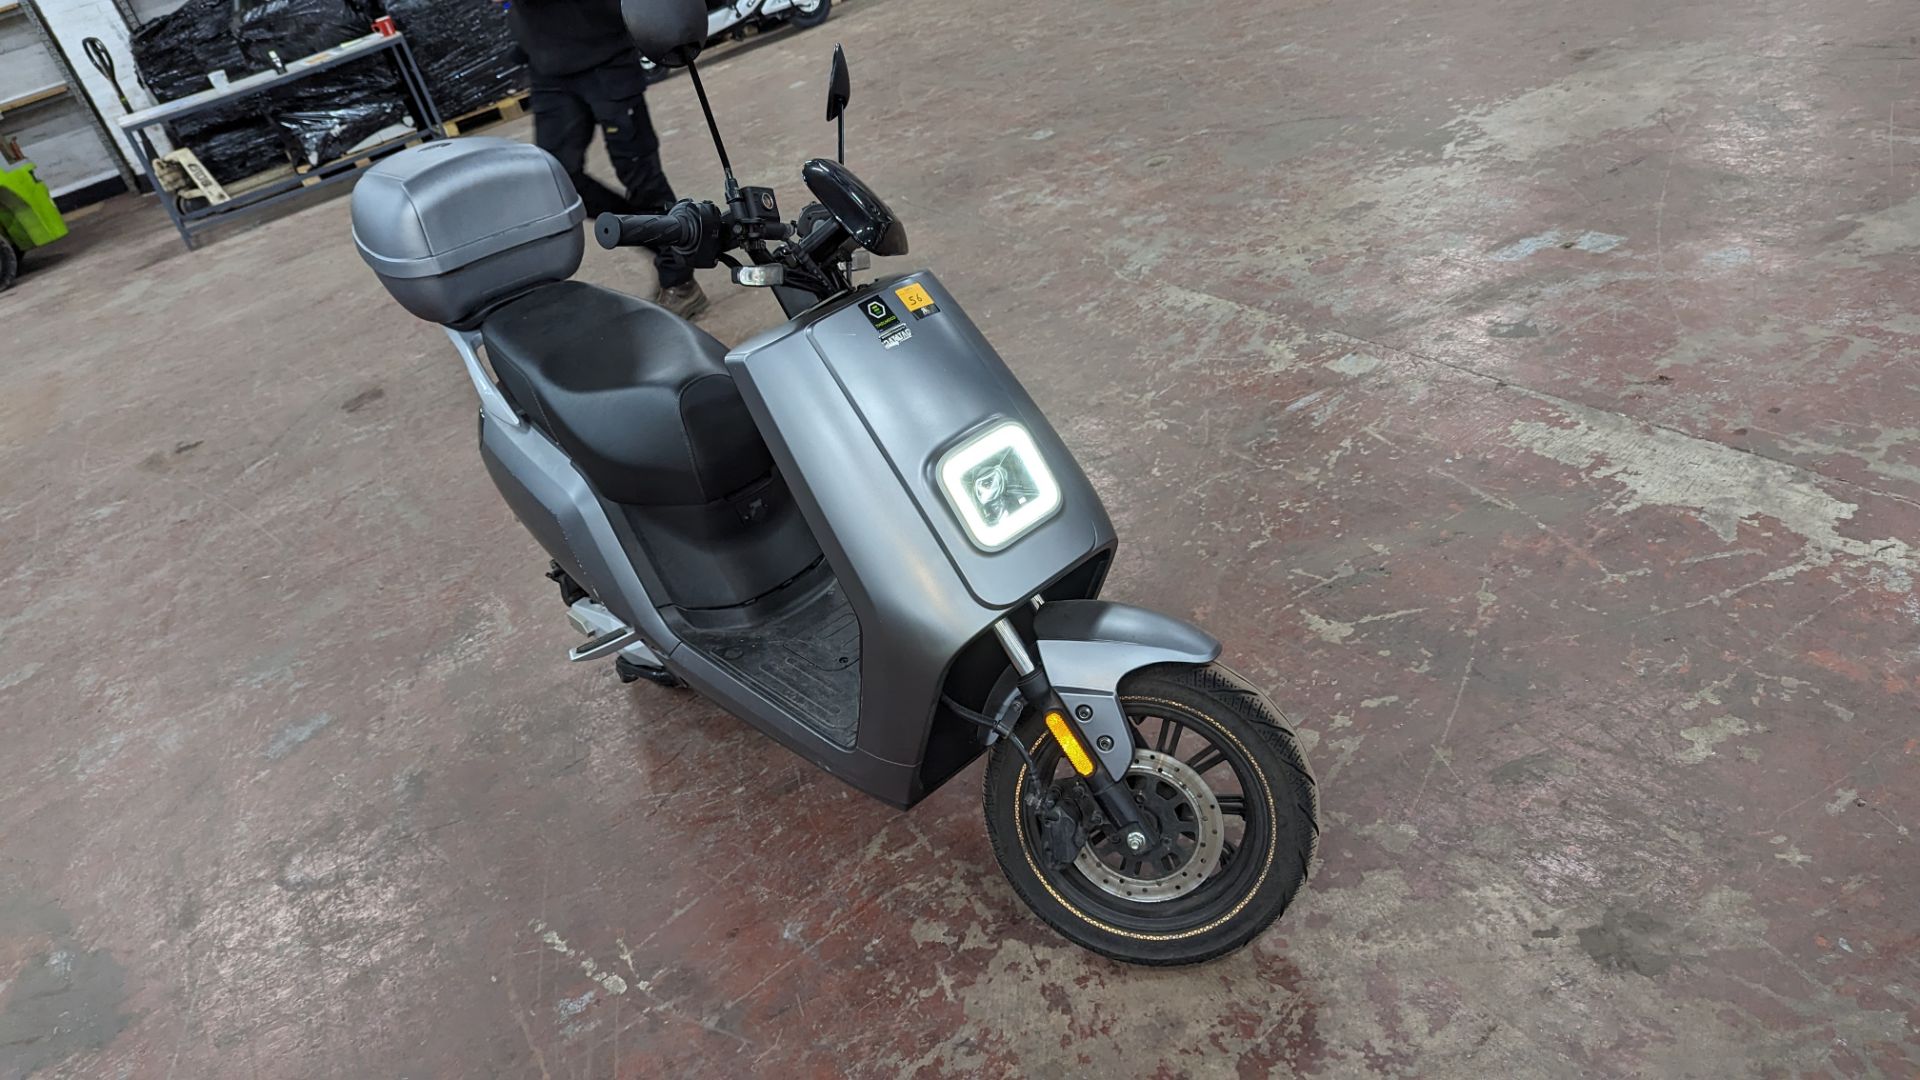 Senda 3000 Electric Moped: Silver/grey, 50cc equivalent, 30mph top speed. Complete with 2 keys to - Image 7 of 13